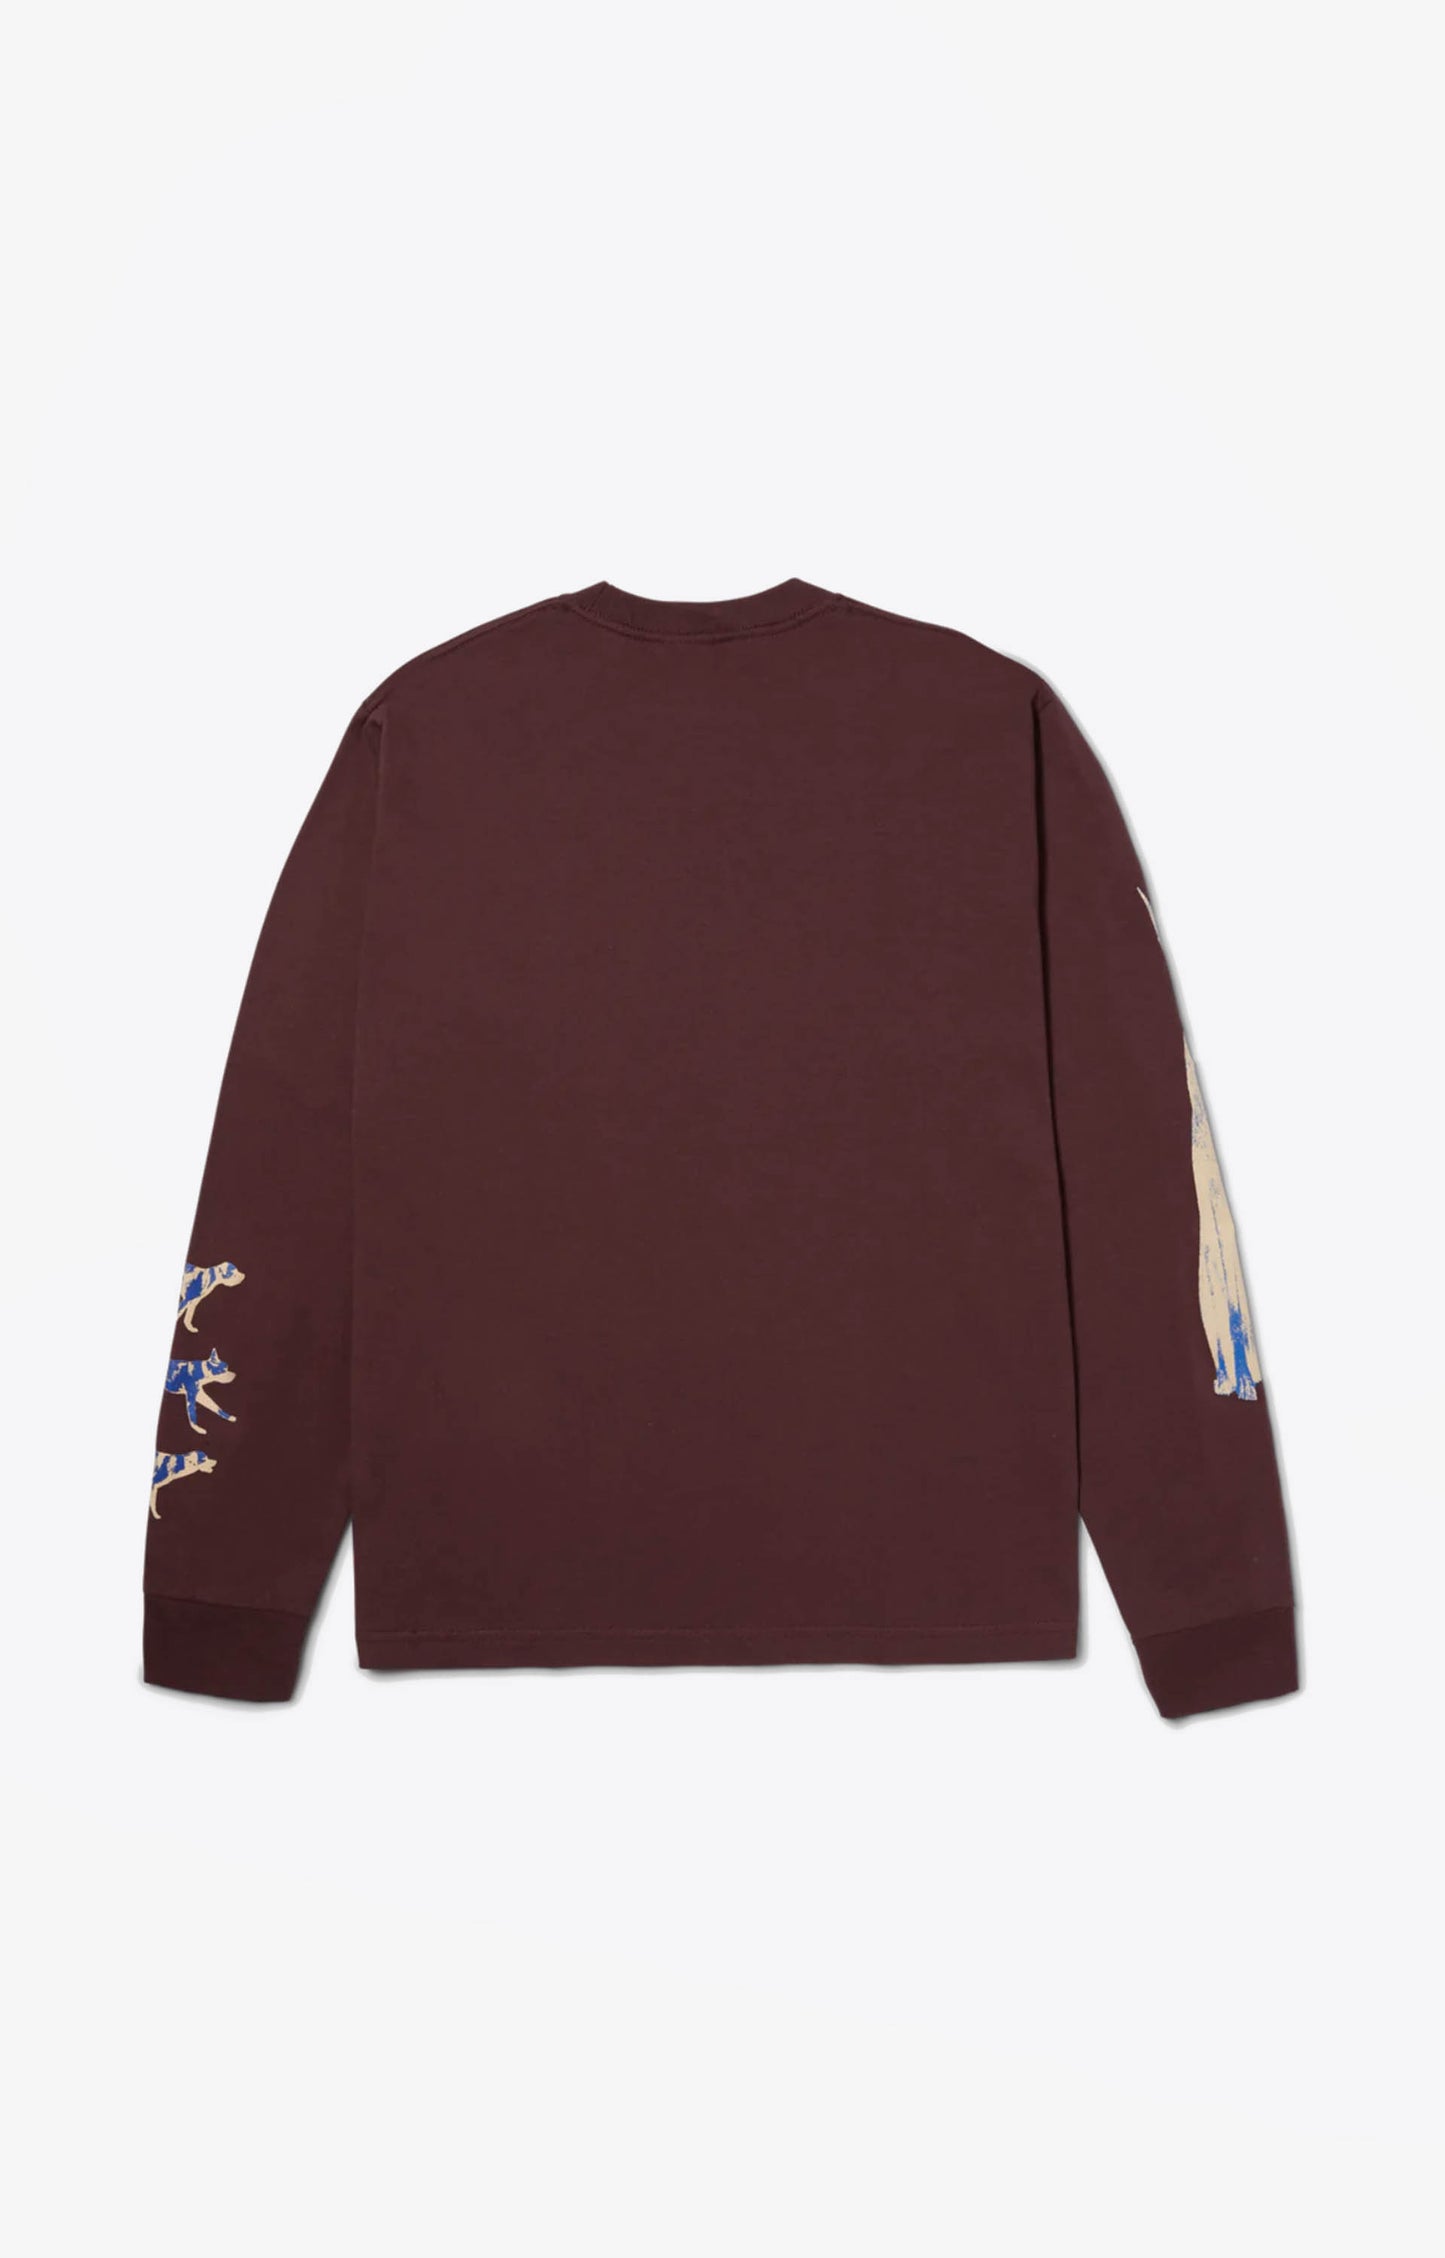 HUF Red Means Go Longsleeve T-Shirt, Eggplant